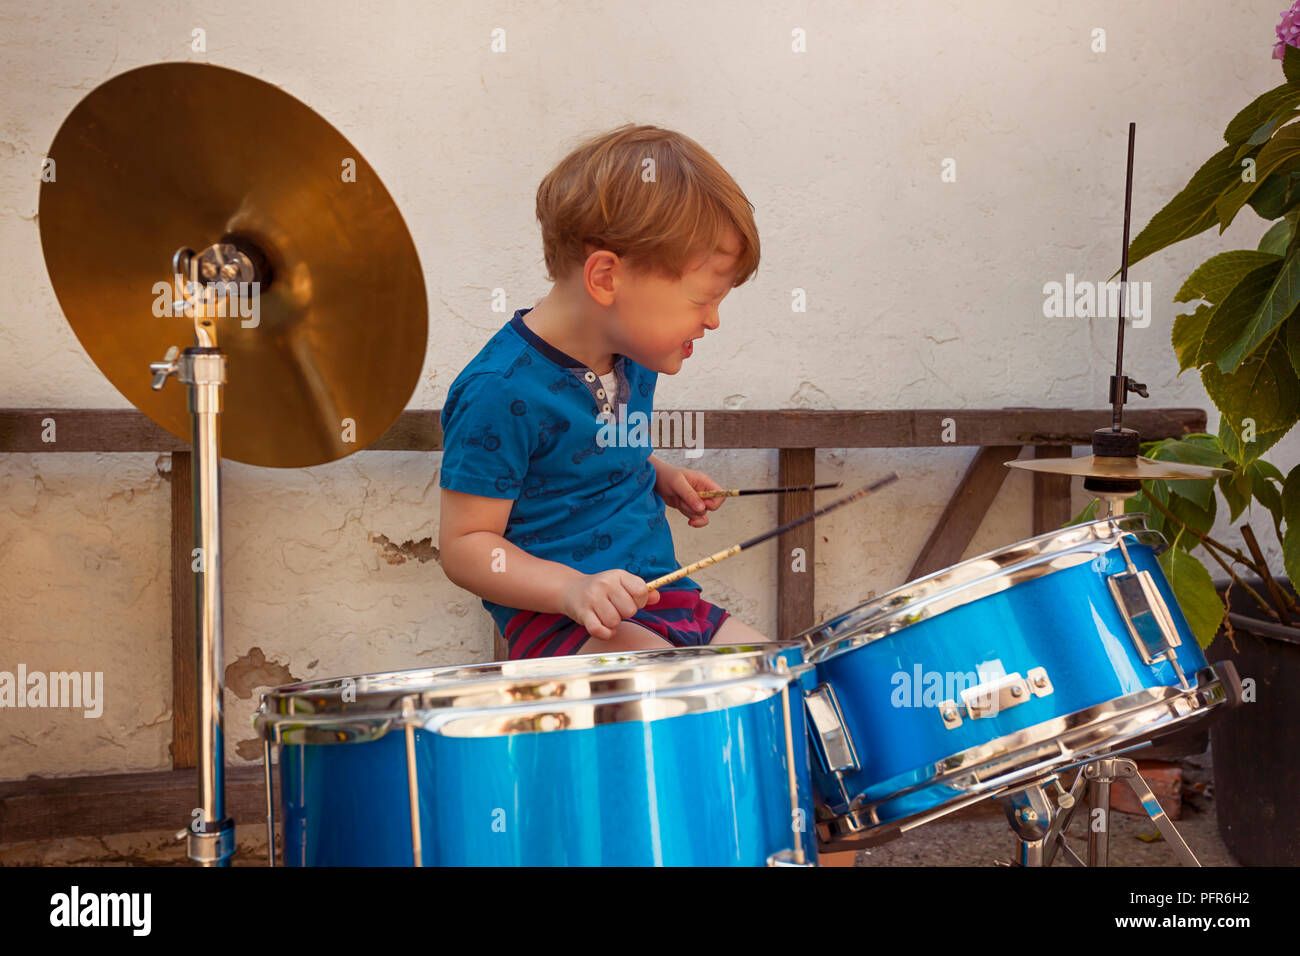 Amazing 3 year old Kid Drummer Playing with a rockstar attitude Stock Photo